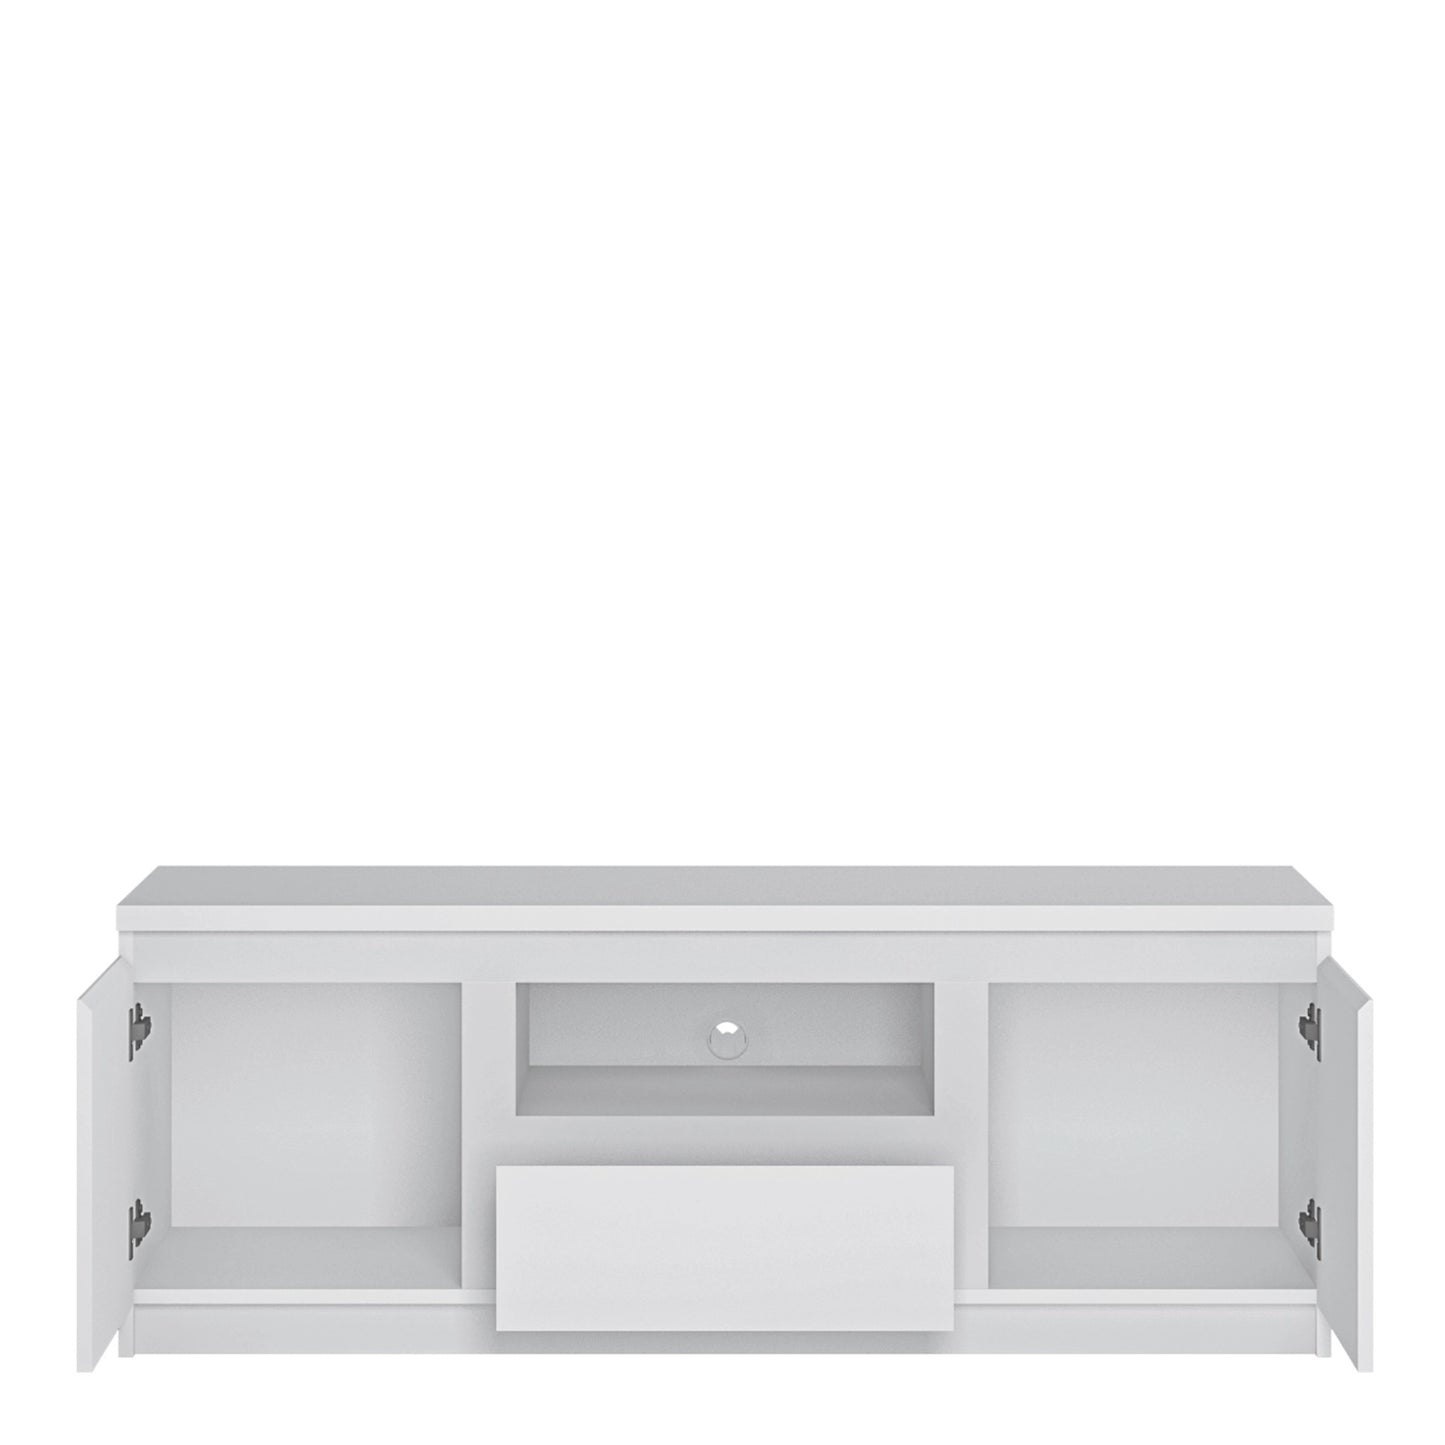 Furniture To Go Fribo 2 Door 1 Drawer 136cm Wide TV Cabinet in White